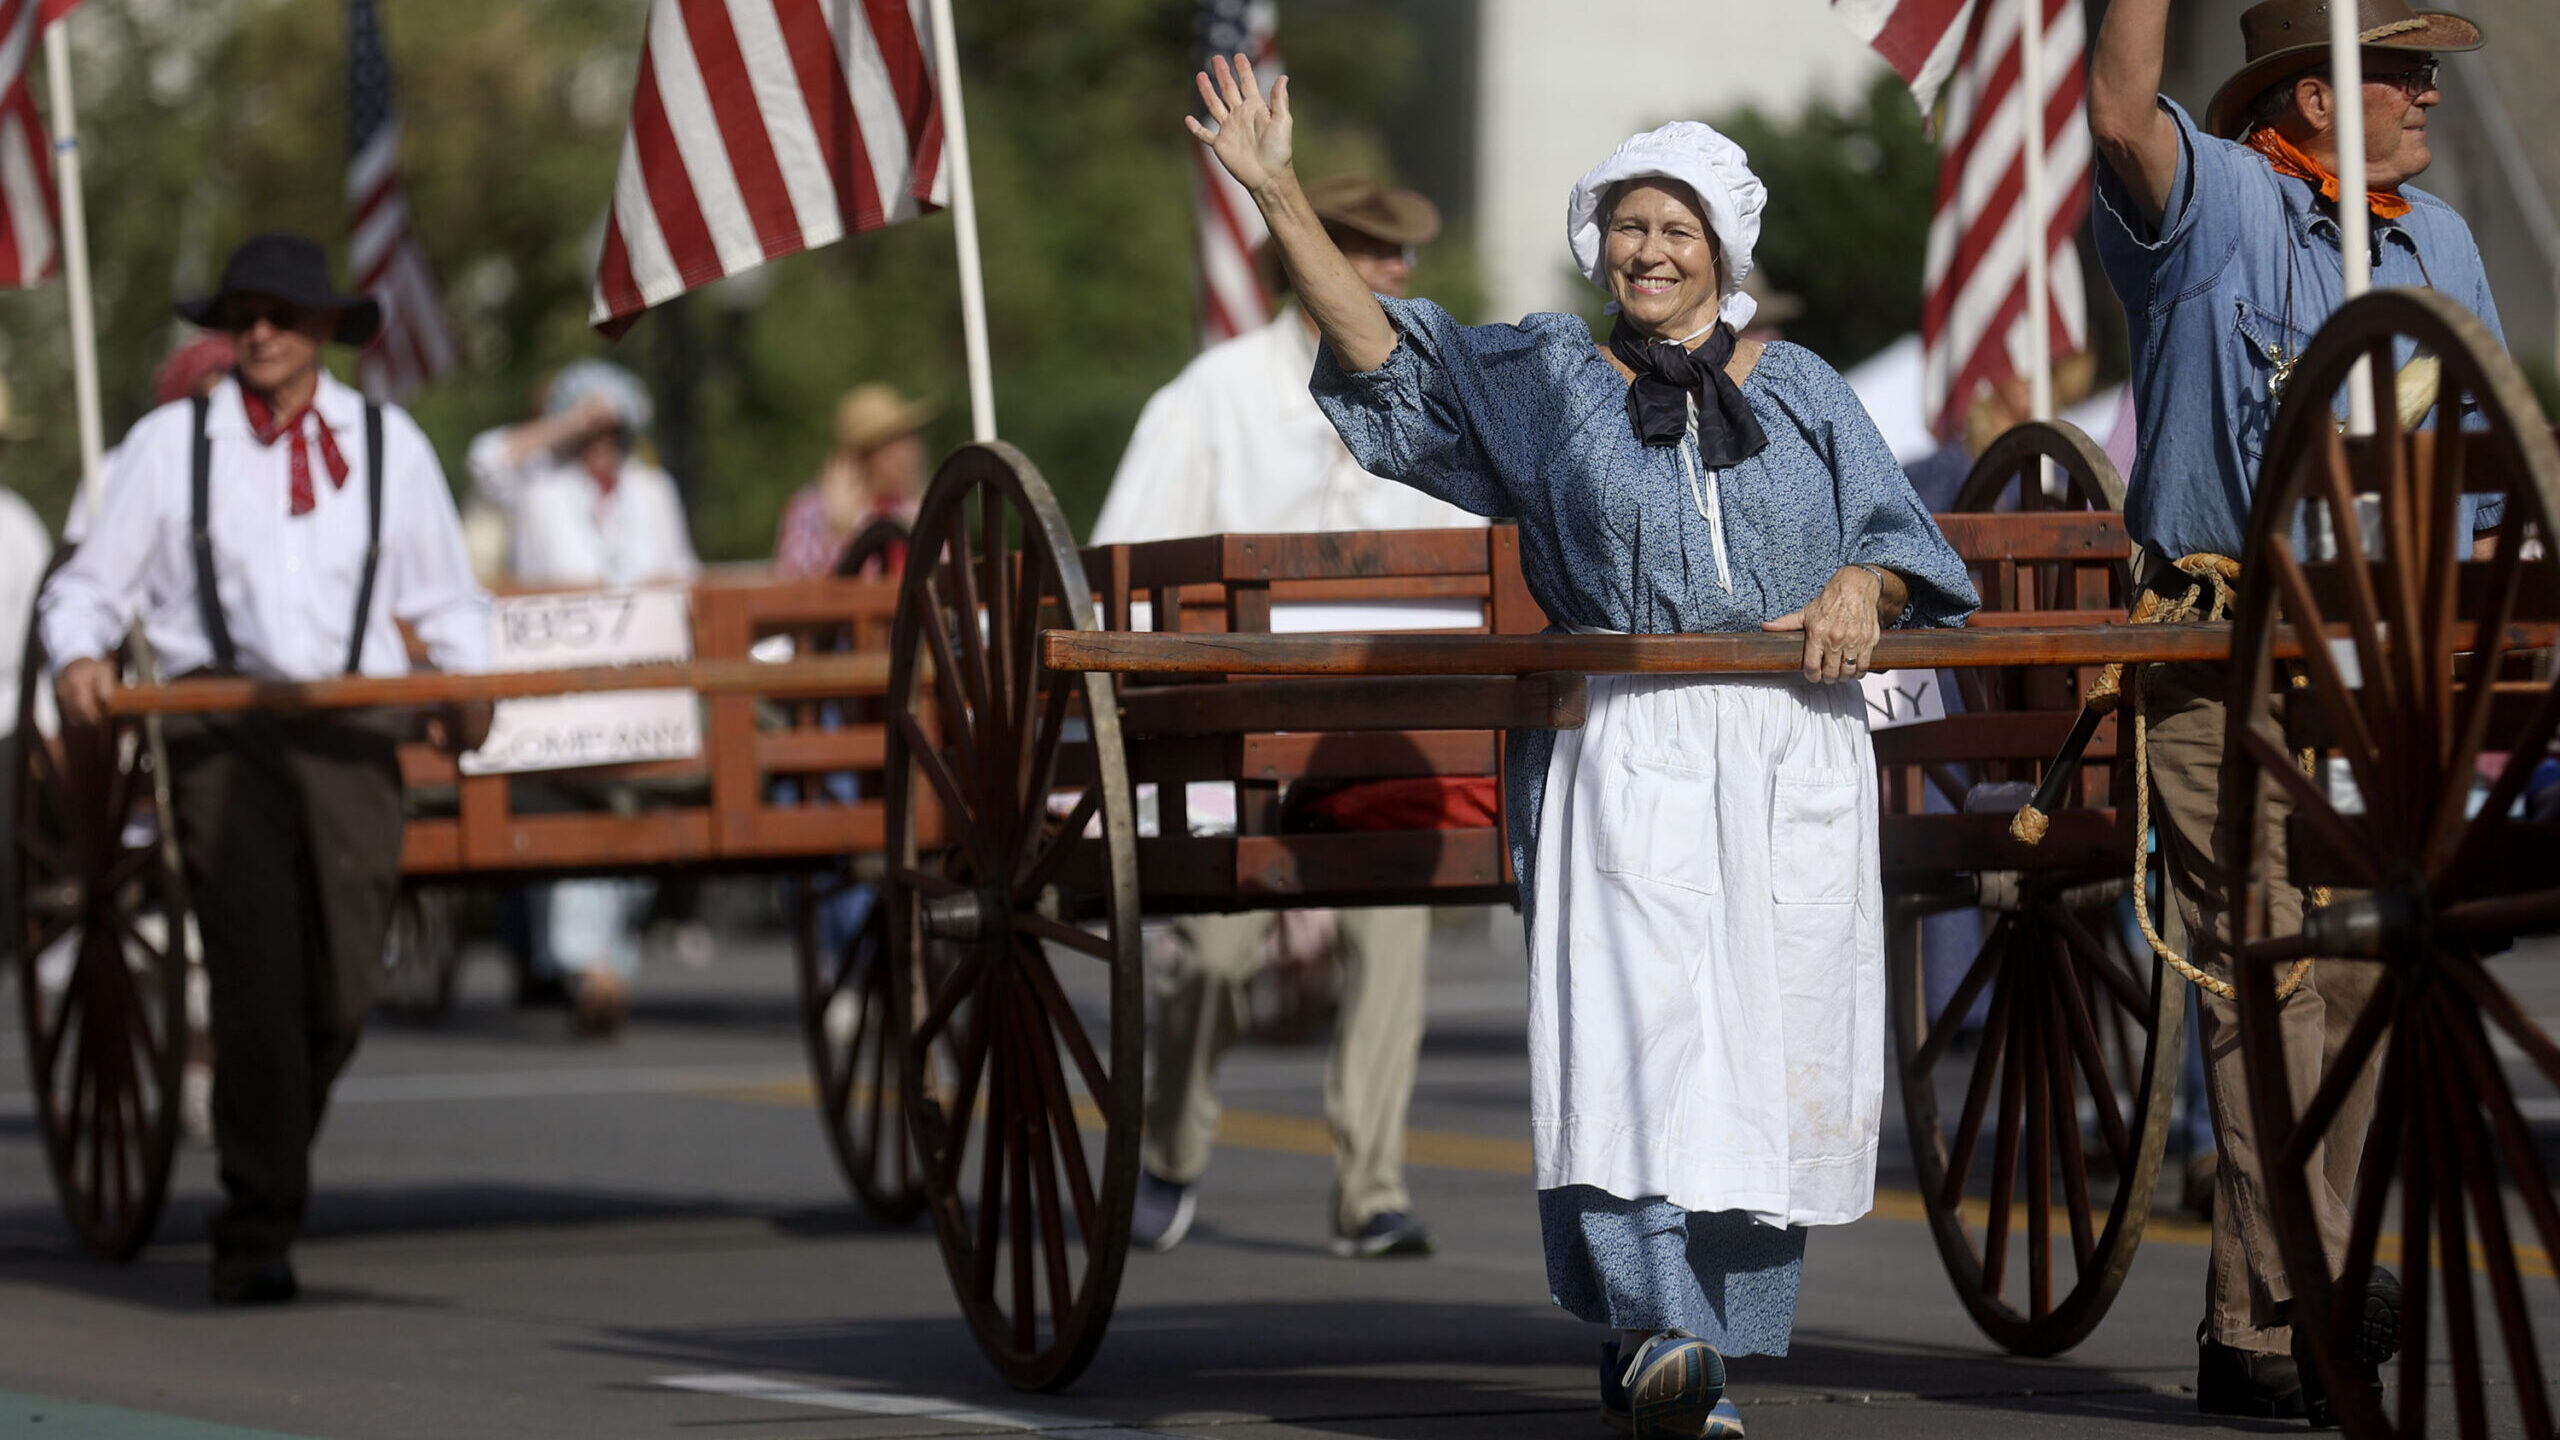 wagons drive down in the pioneer day parade in utah...